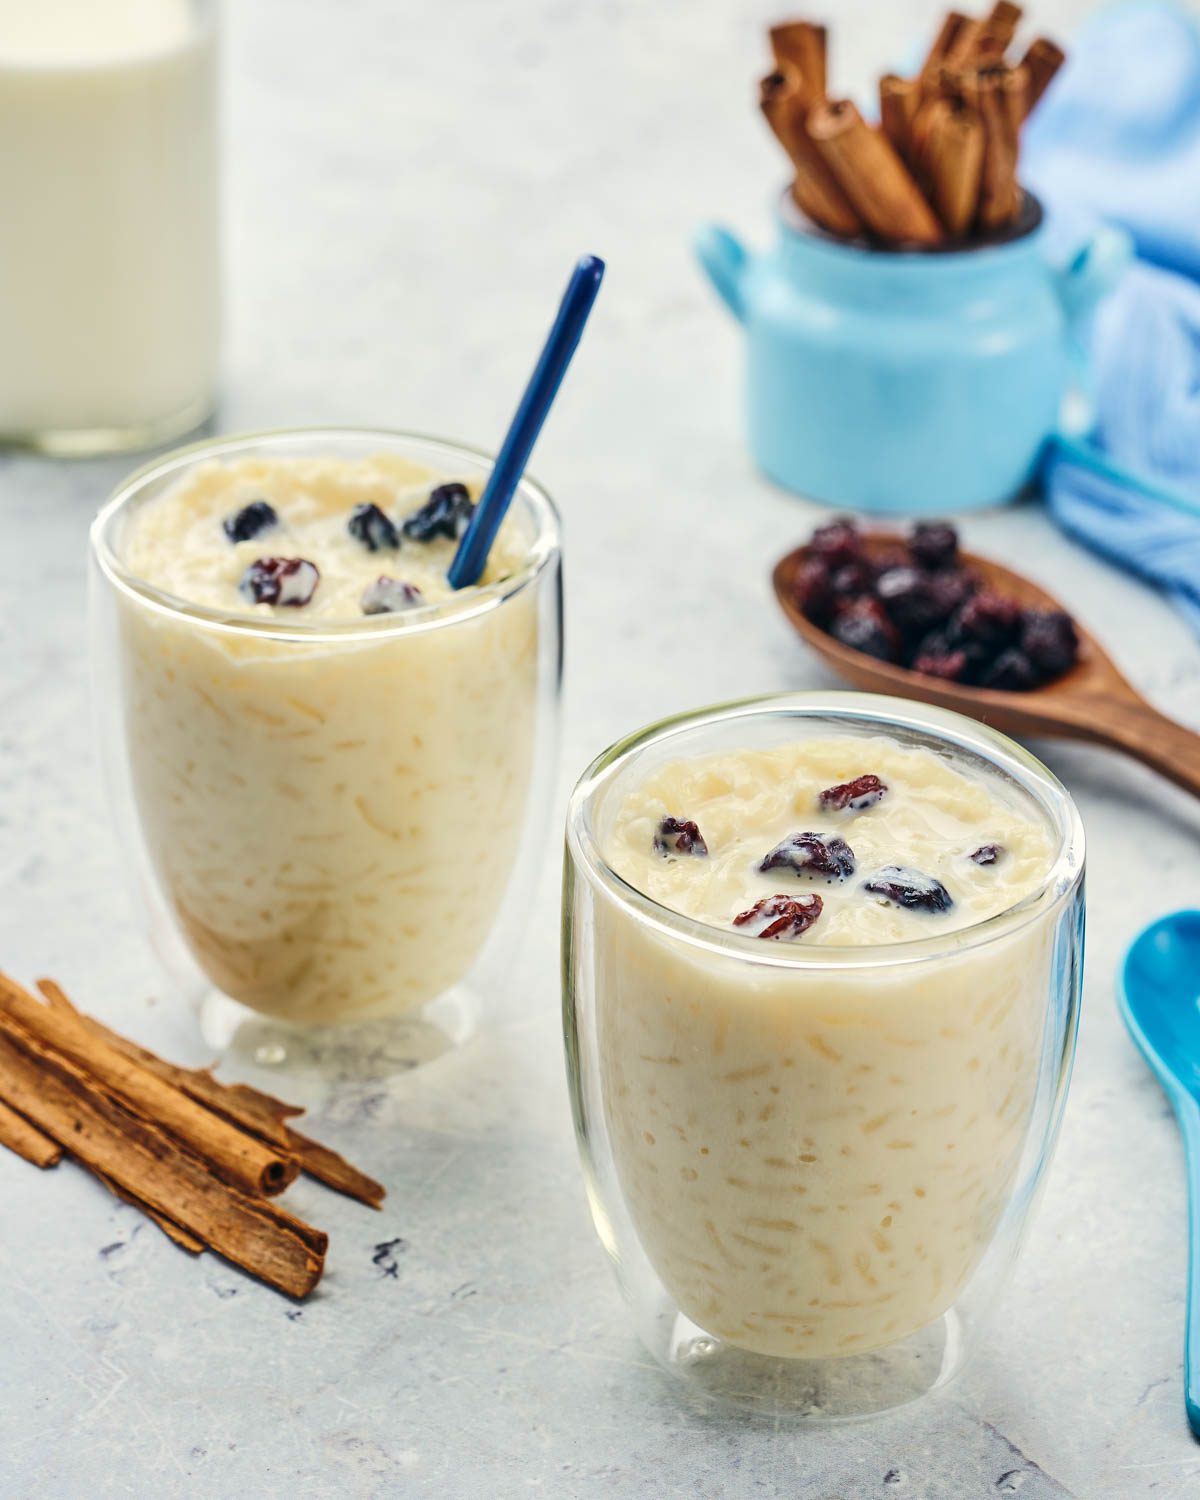 Rice pudding served in glass cups with raisins and cinnamon